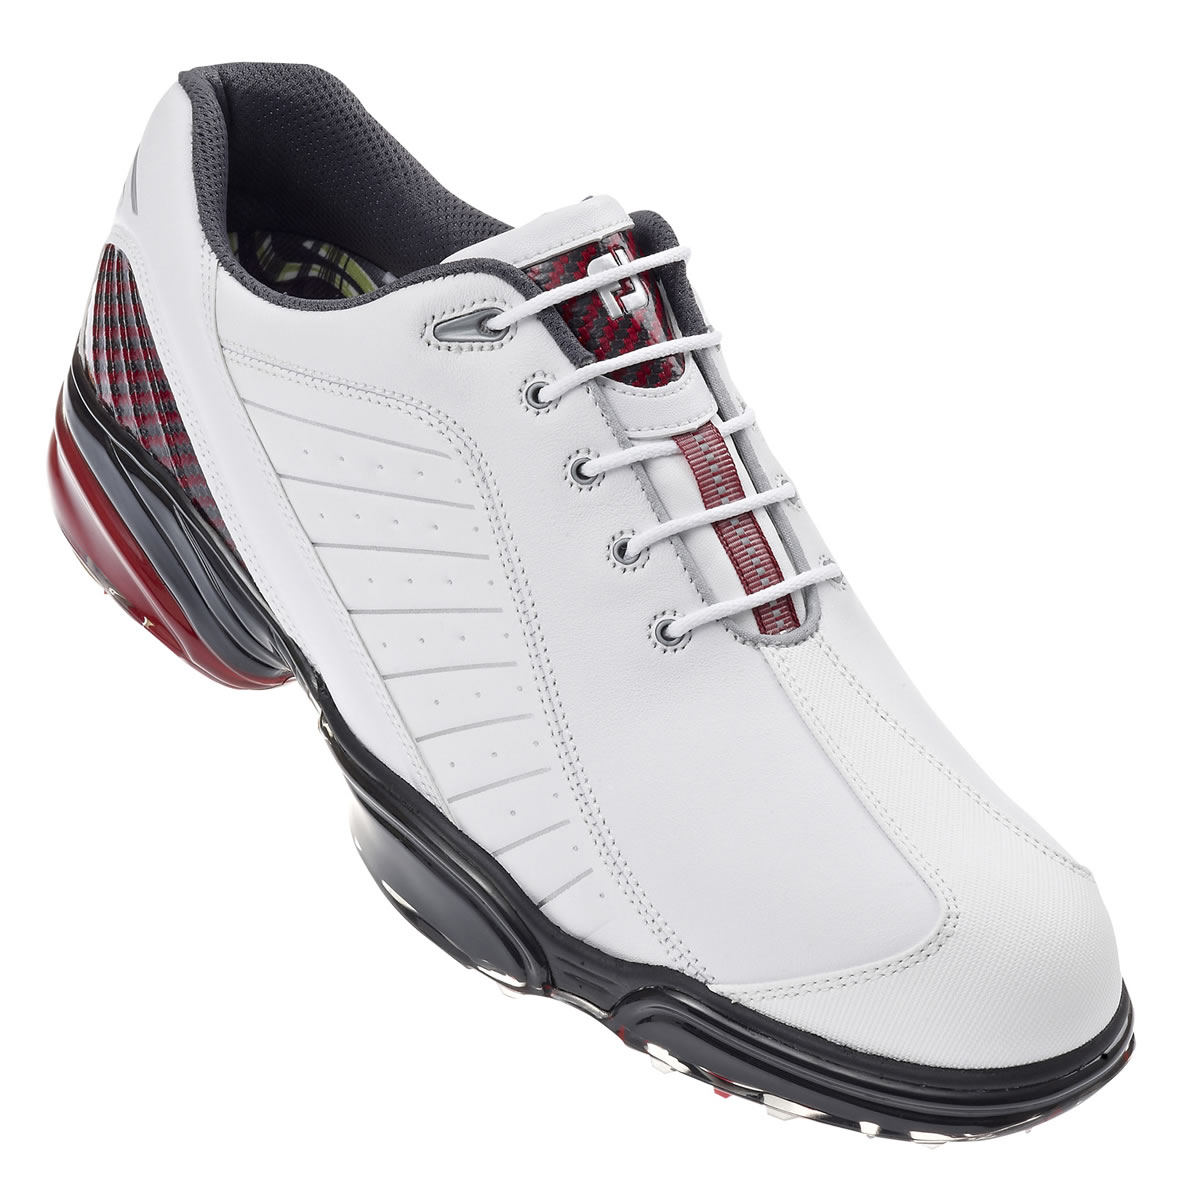 FootJoy Sport Golf Shoes White/Red #53208